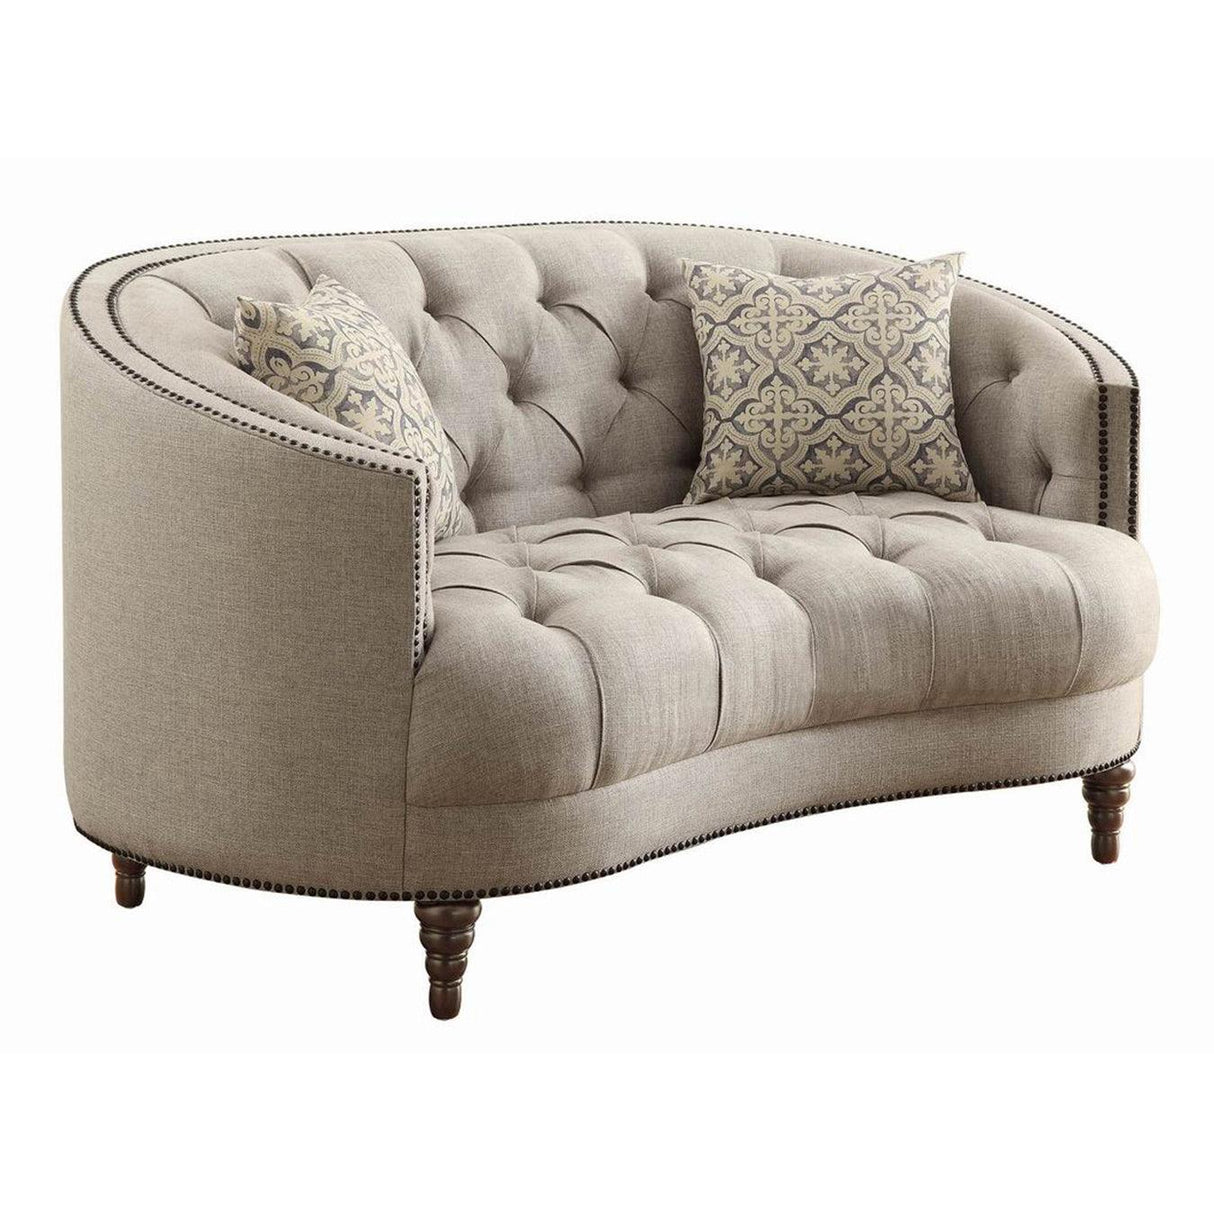 Avonlea Linen-like Upholstered Tufted Sofa and Loveseat Grey by Coaster Furniture Coaster Furniture